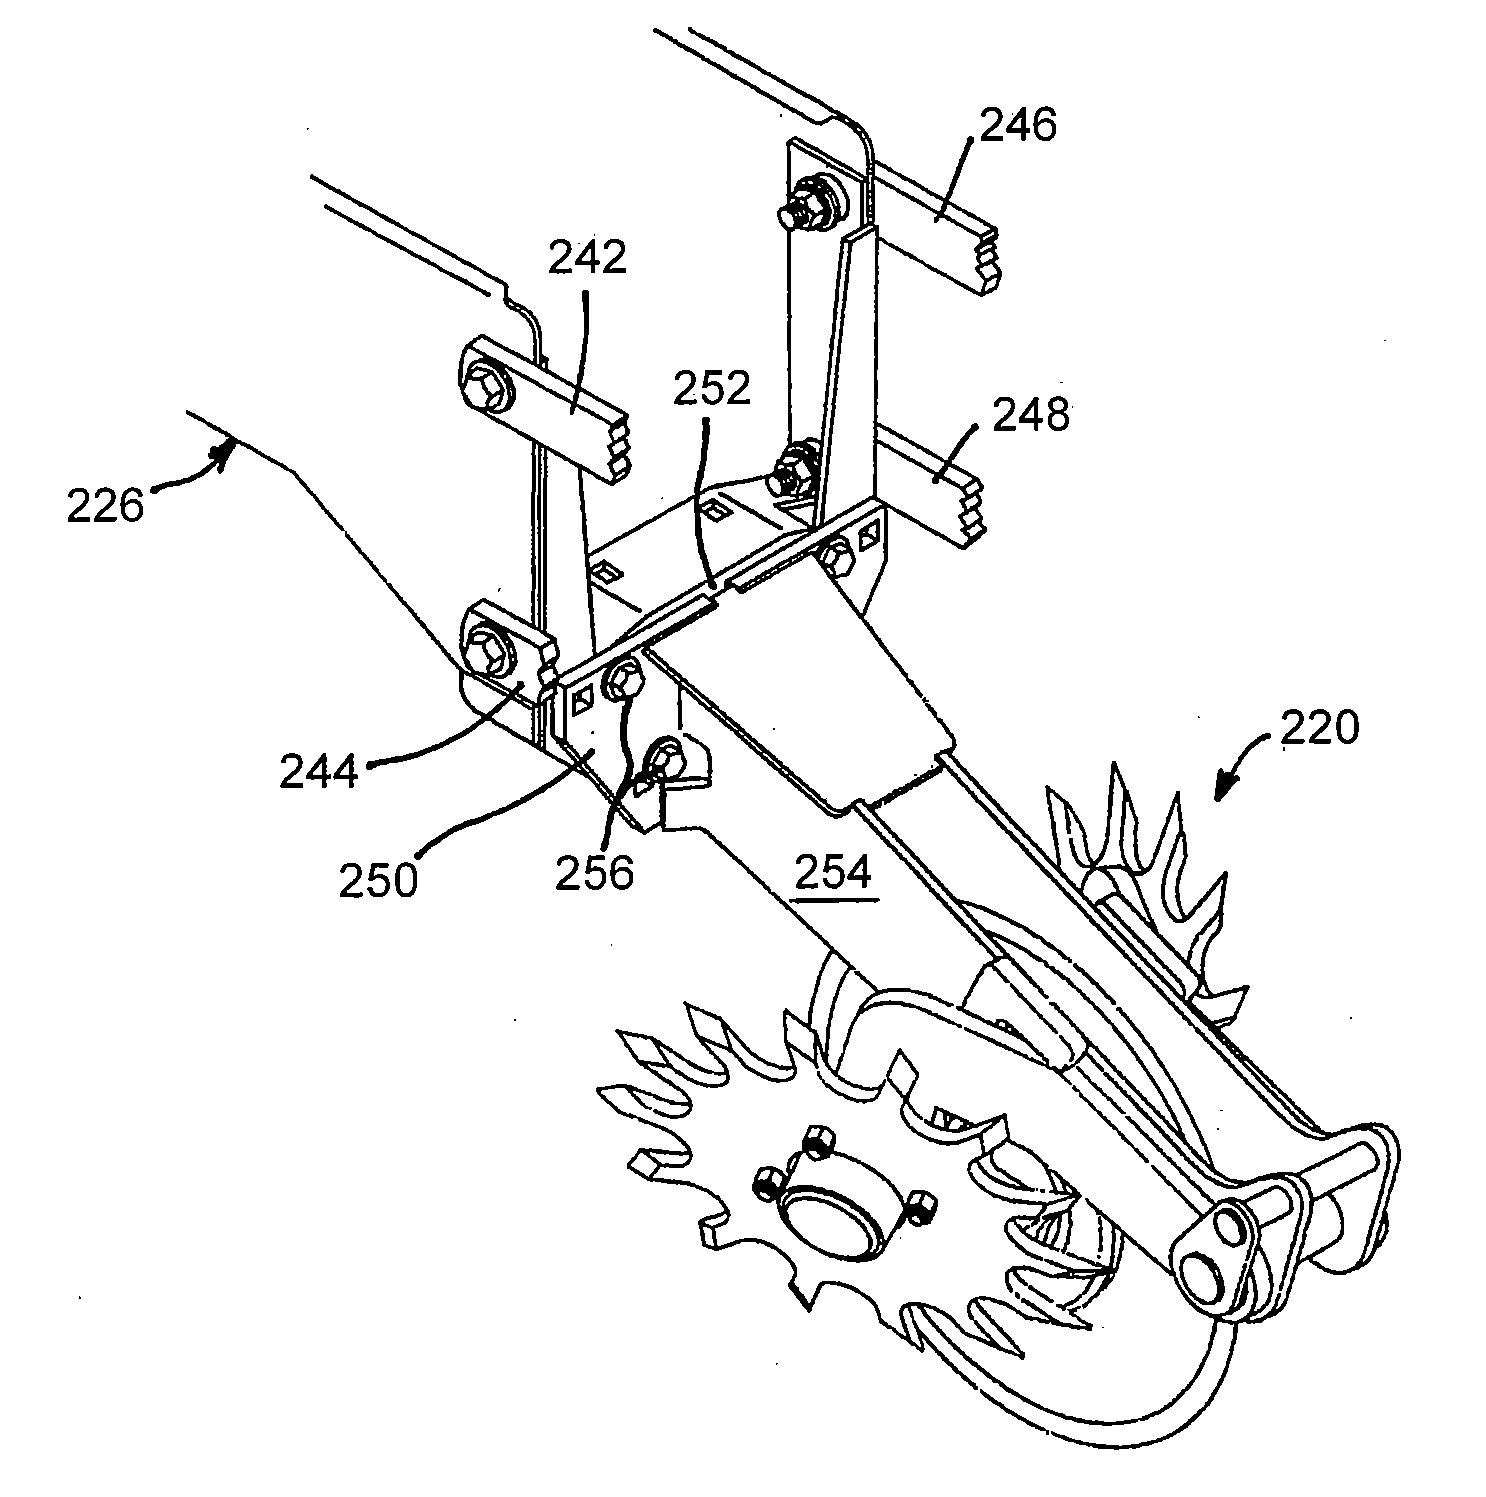 Crop residue clearing device